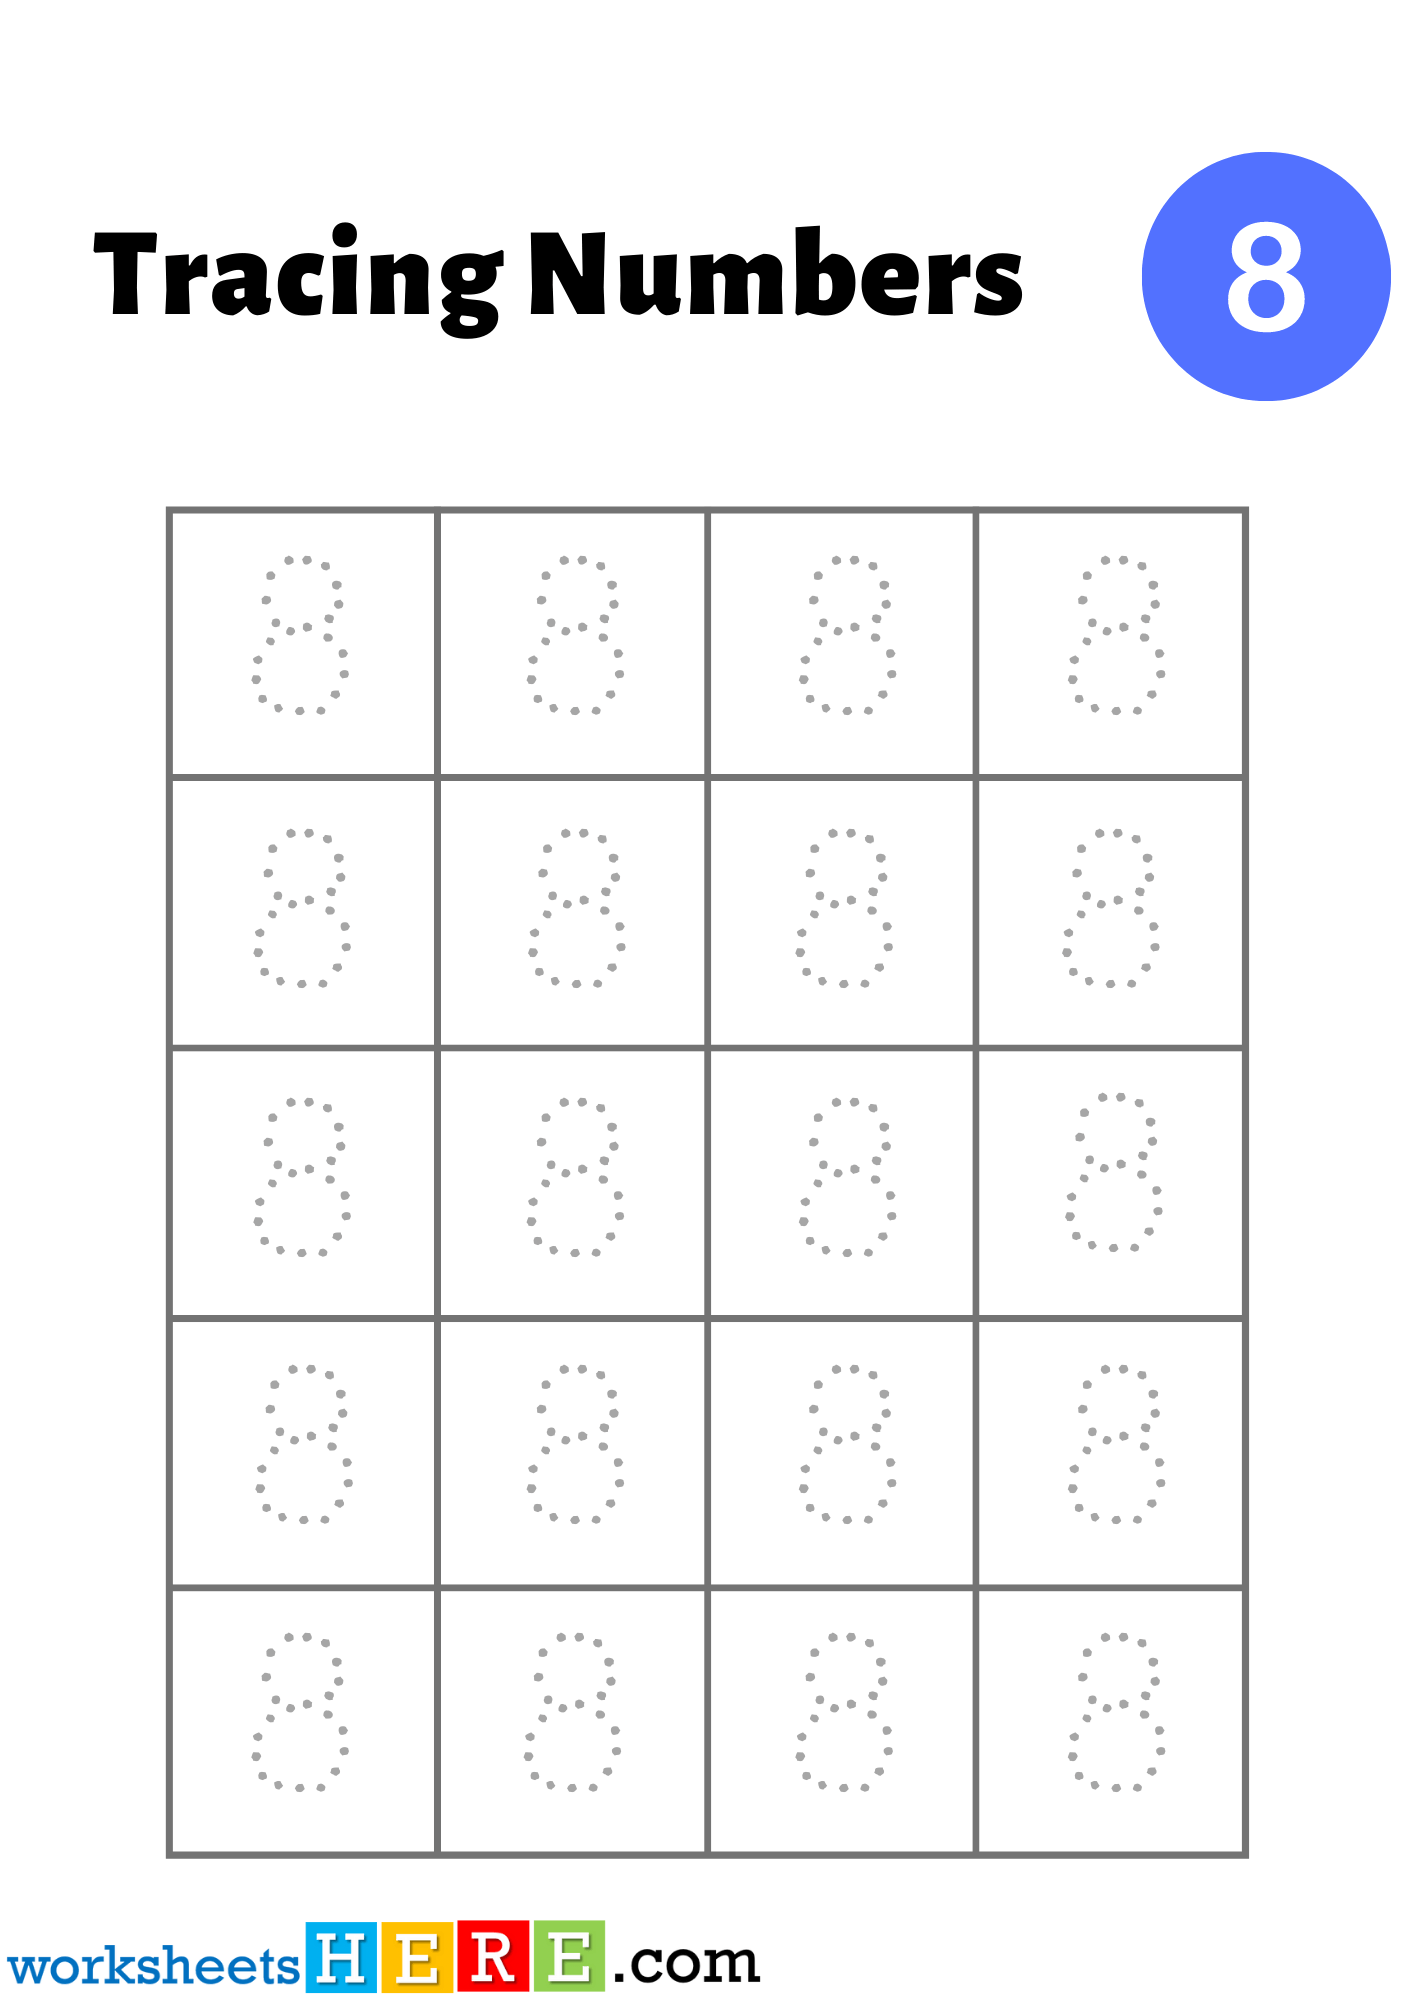 Tracing Numbers Activity, Number 8 Trace Pdf Worksheets For Kids